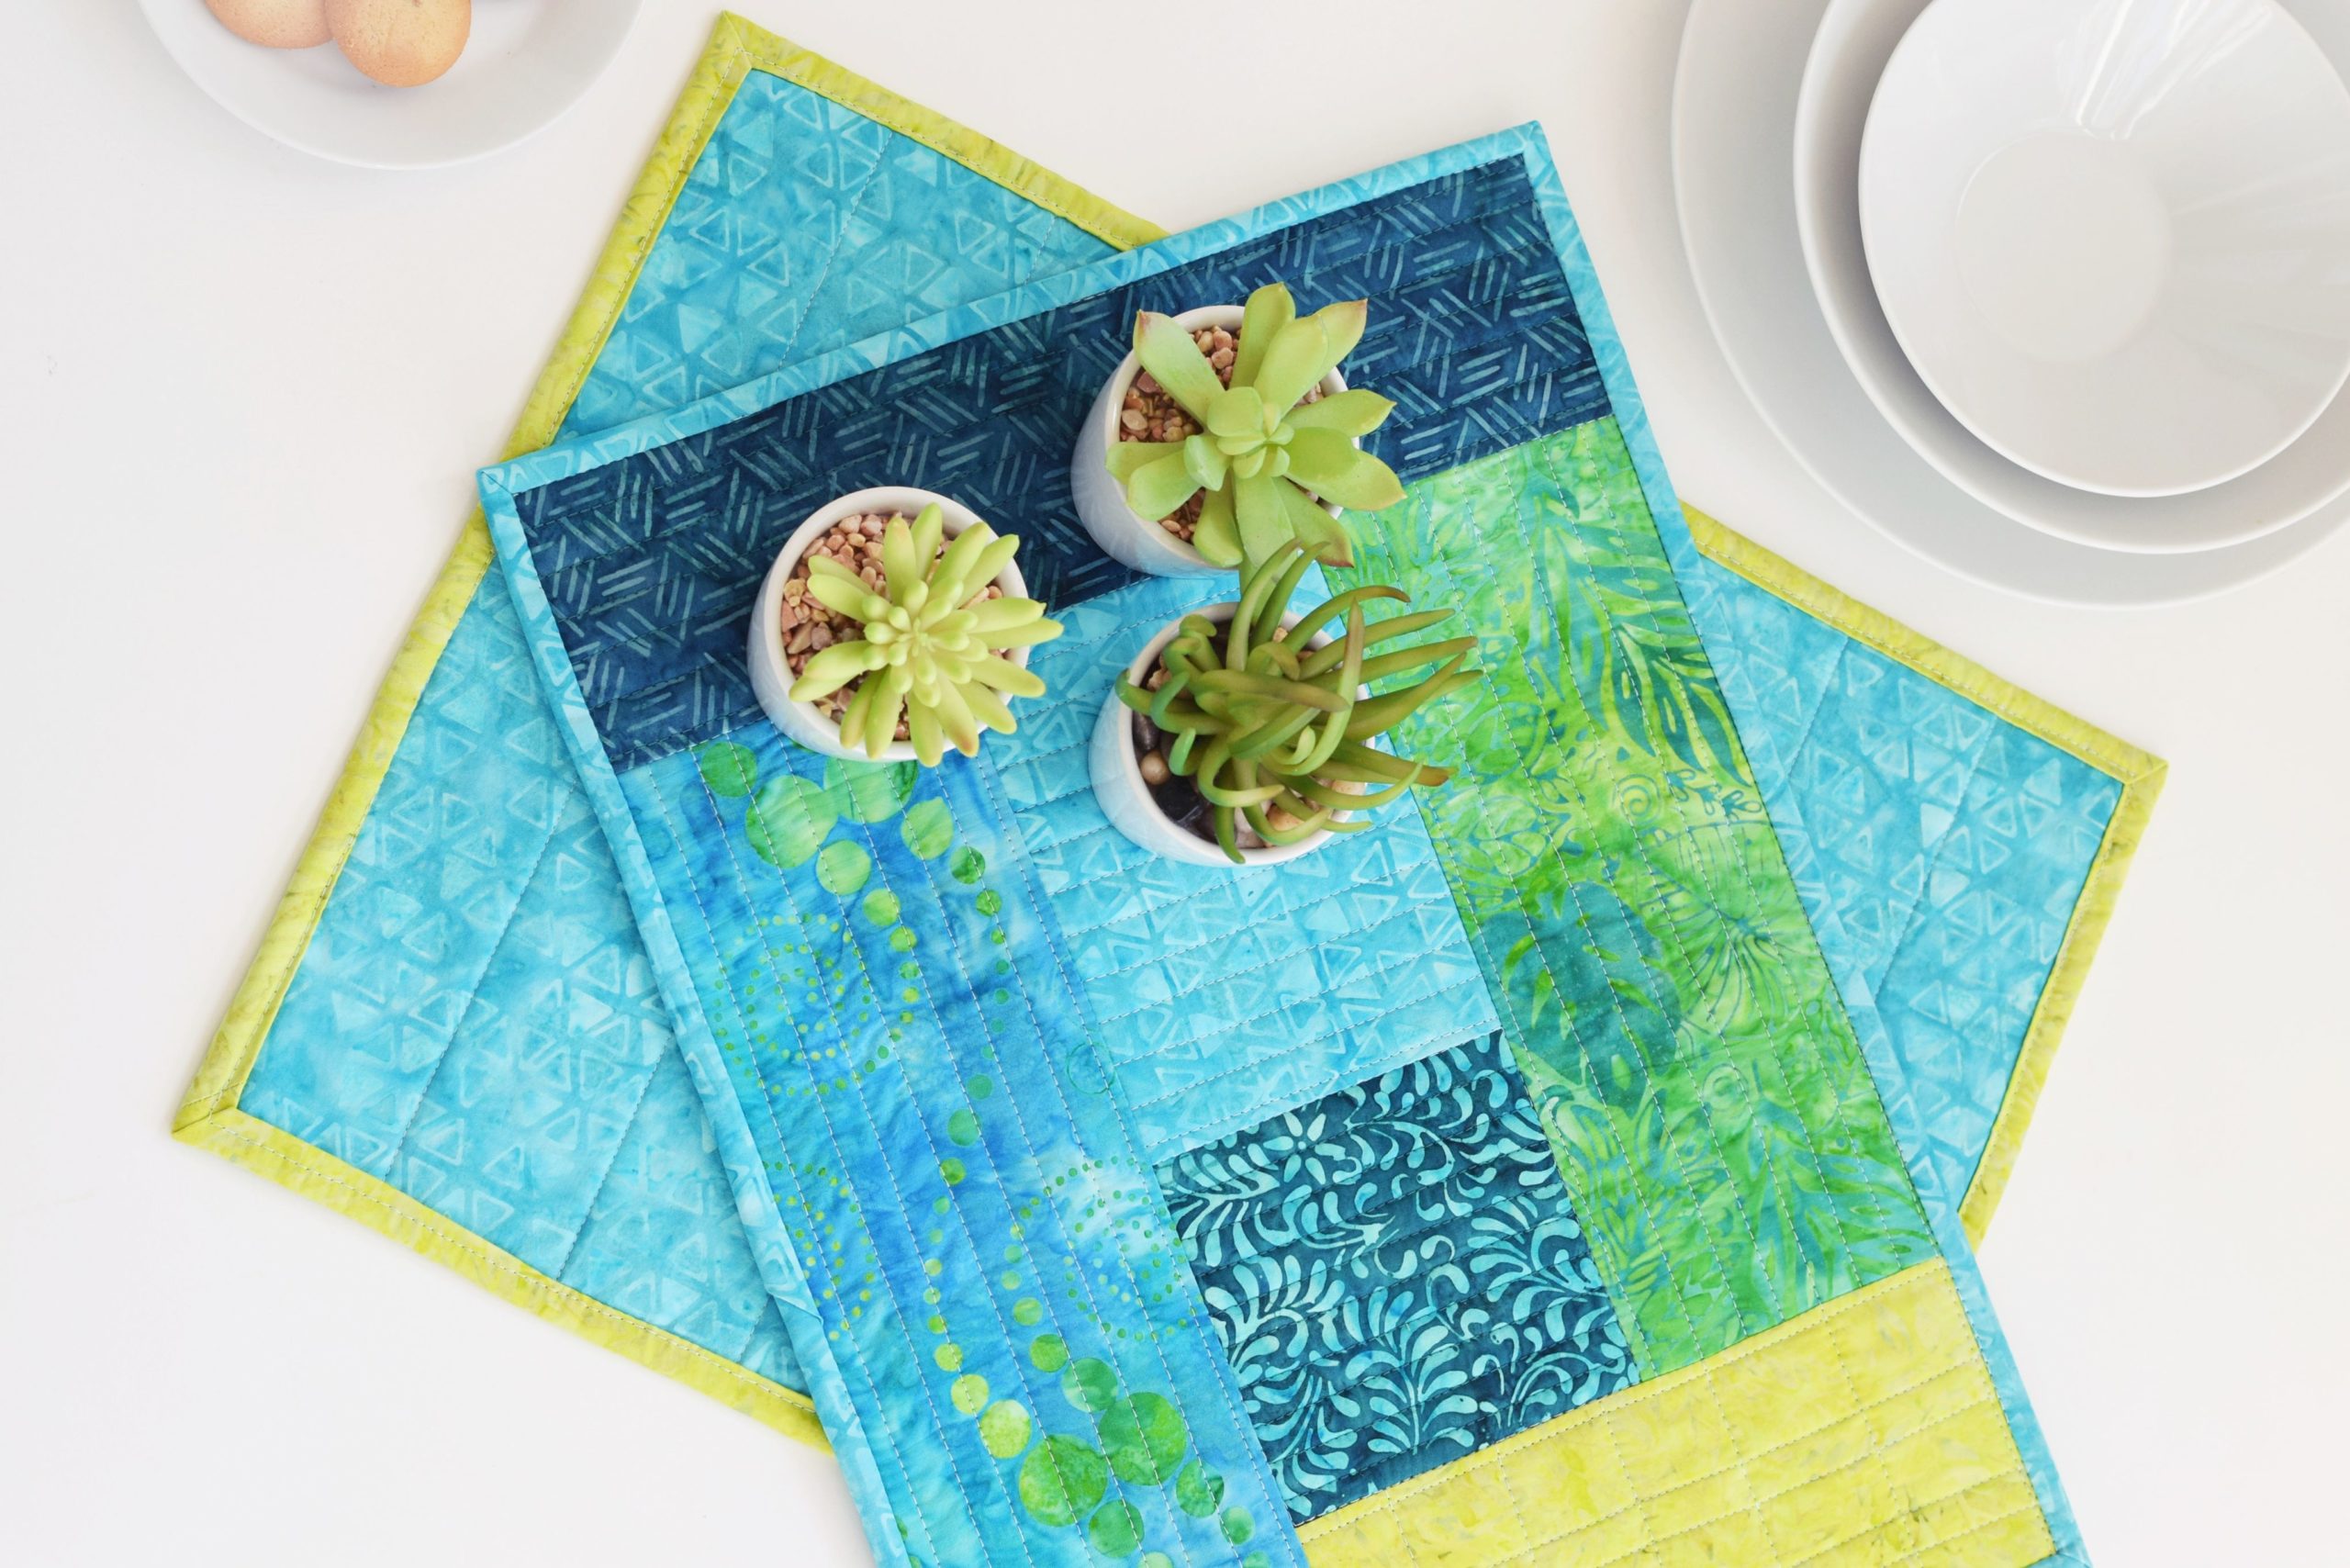 aqua and green color quilted placemat with little flower pots with succulents on the placemat